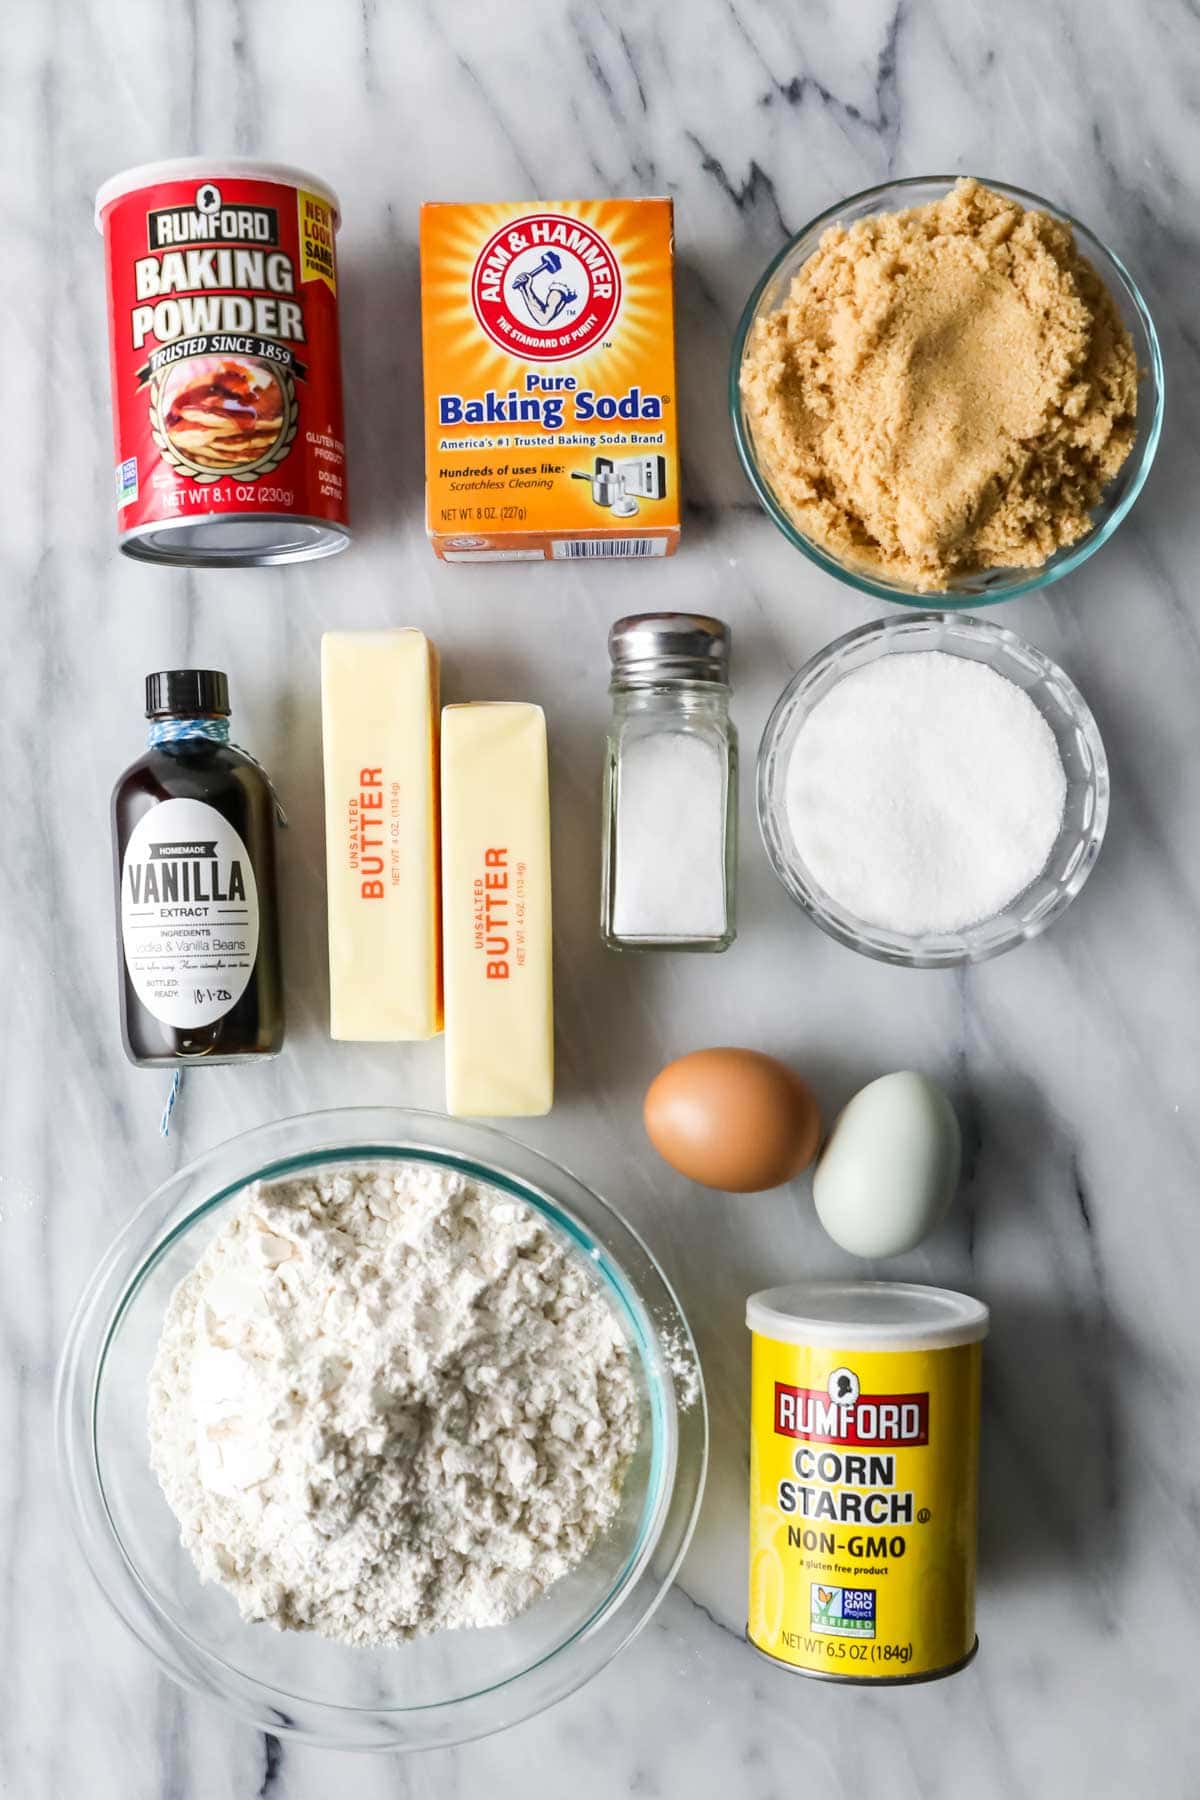 Overhead view of ingredients including brown sugar, flour, vanilla, butter, and more.